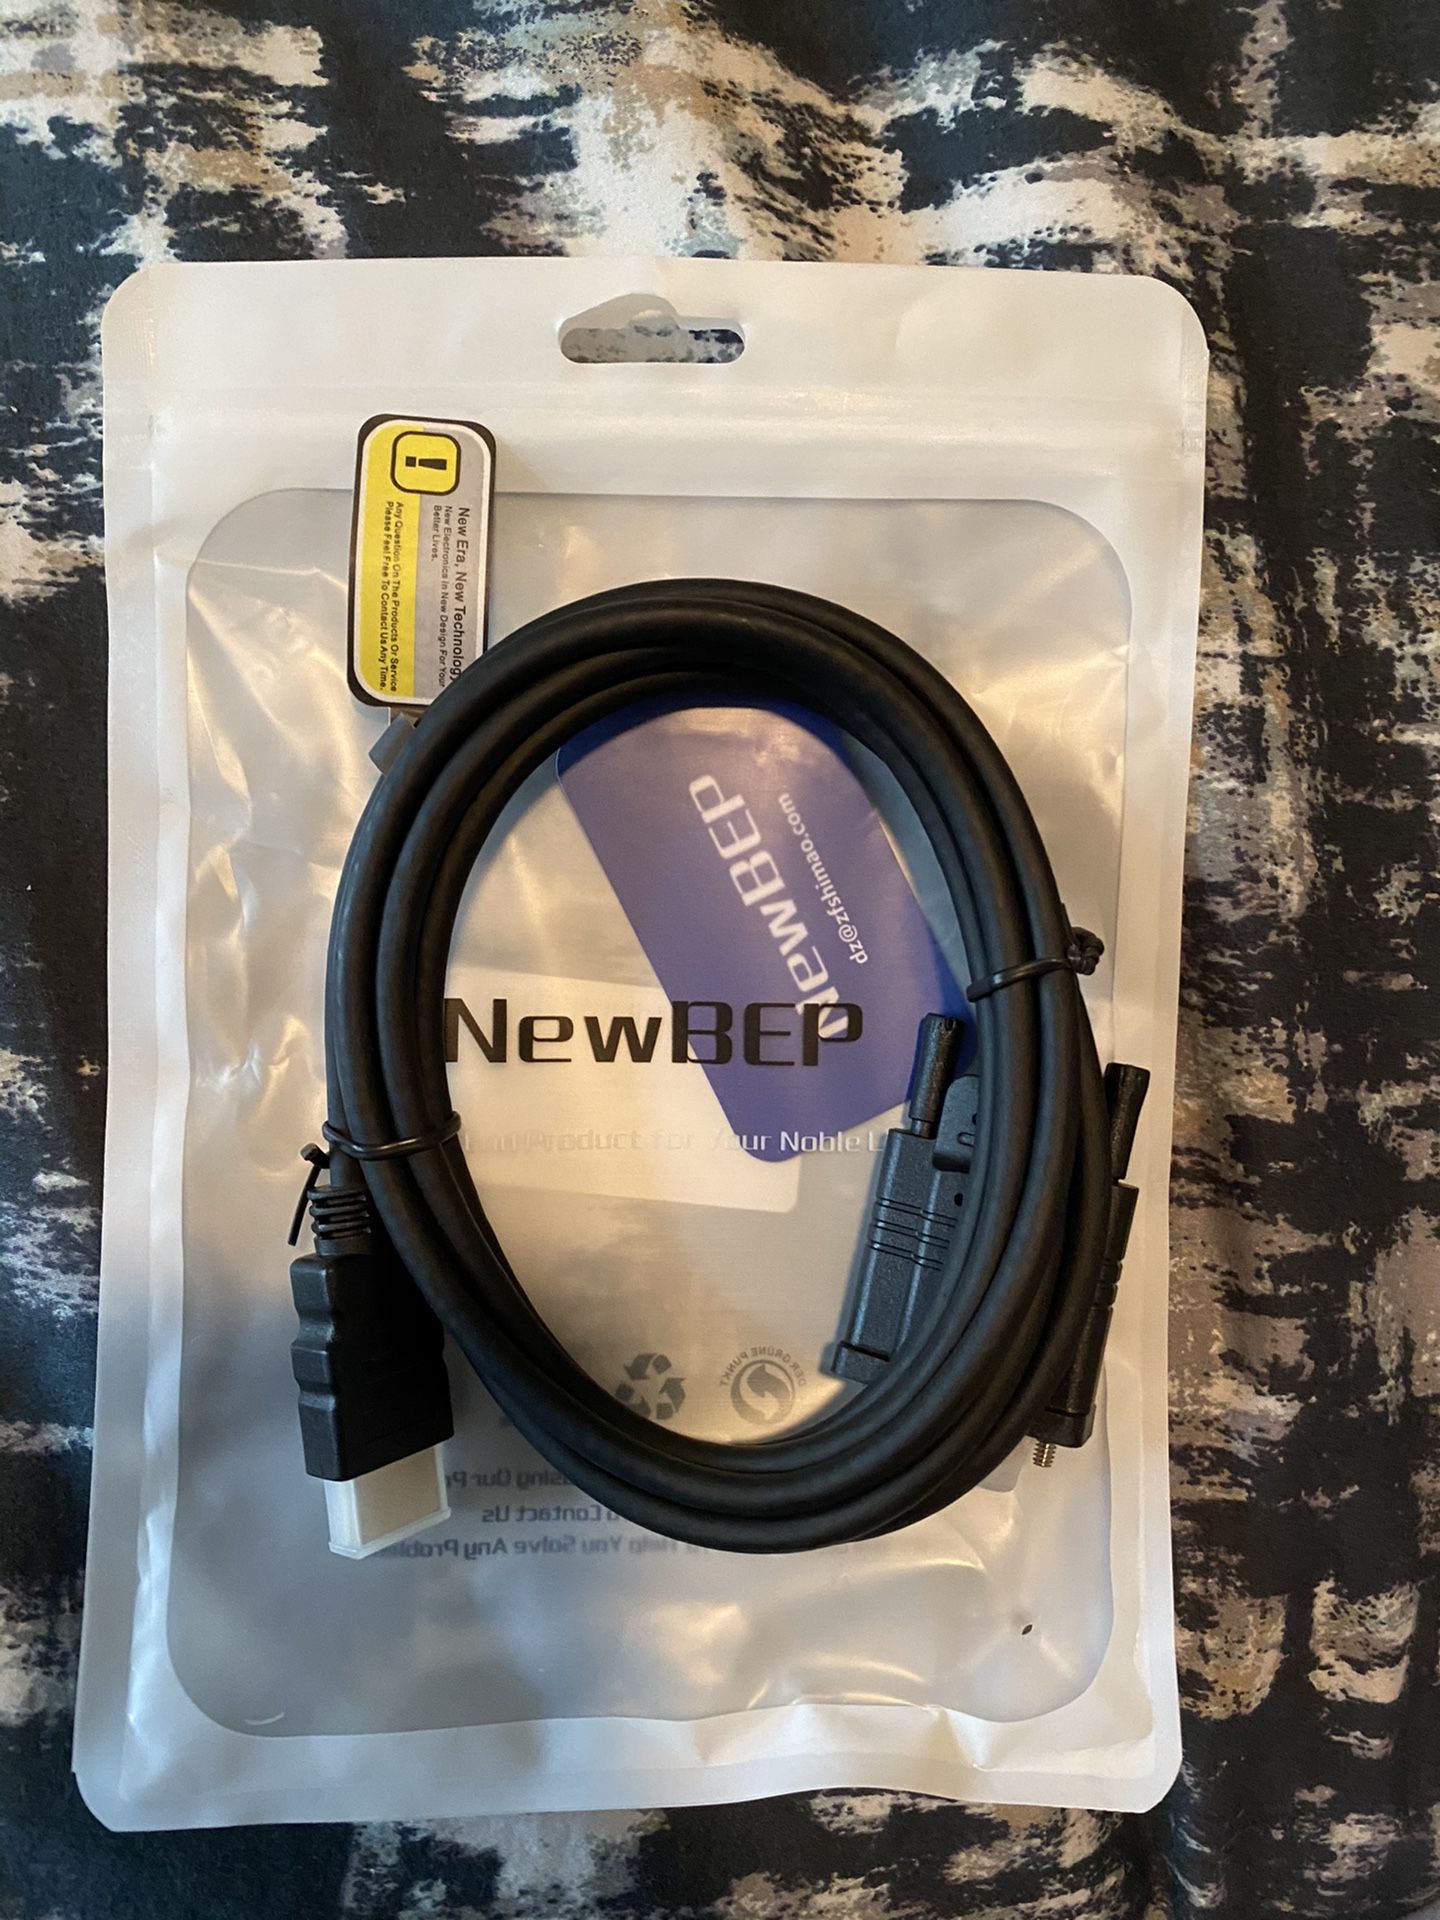 NewBEP HDMI to VGA Adapter Cable